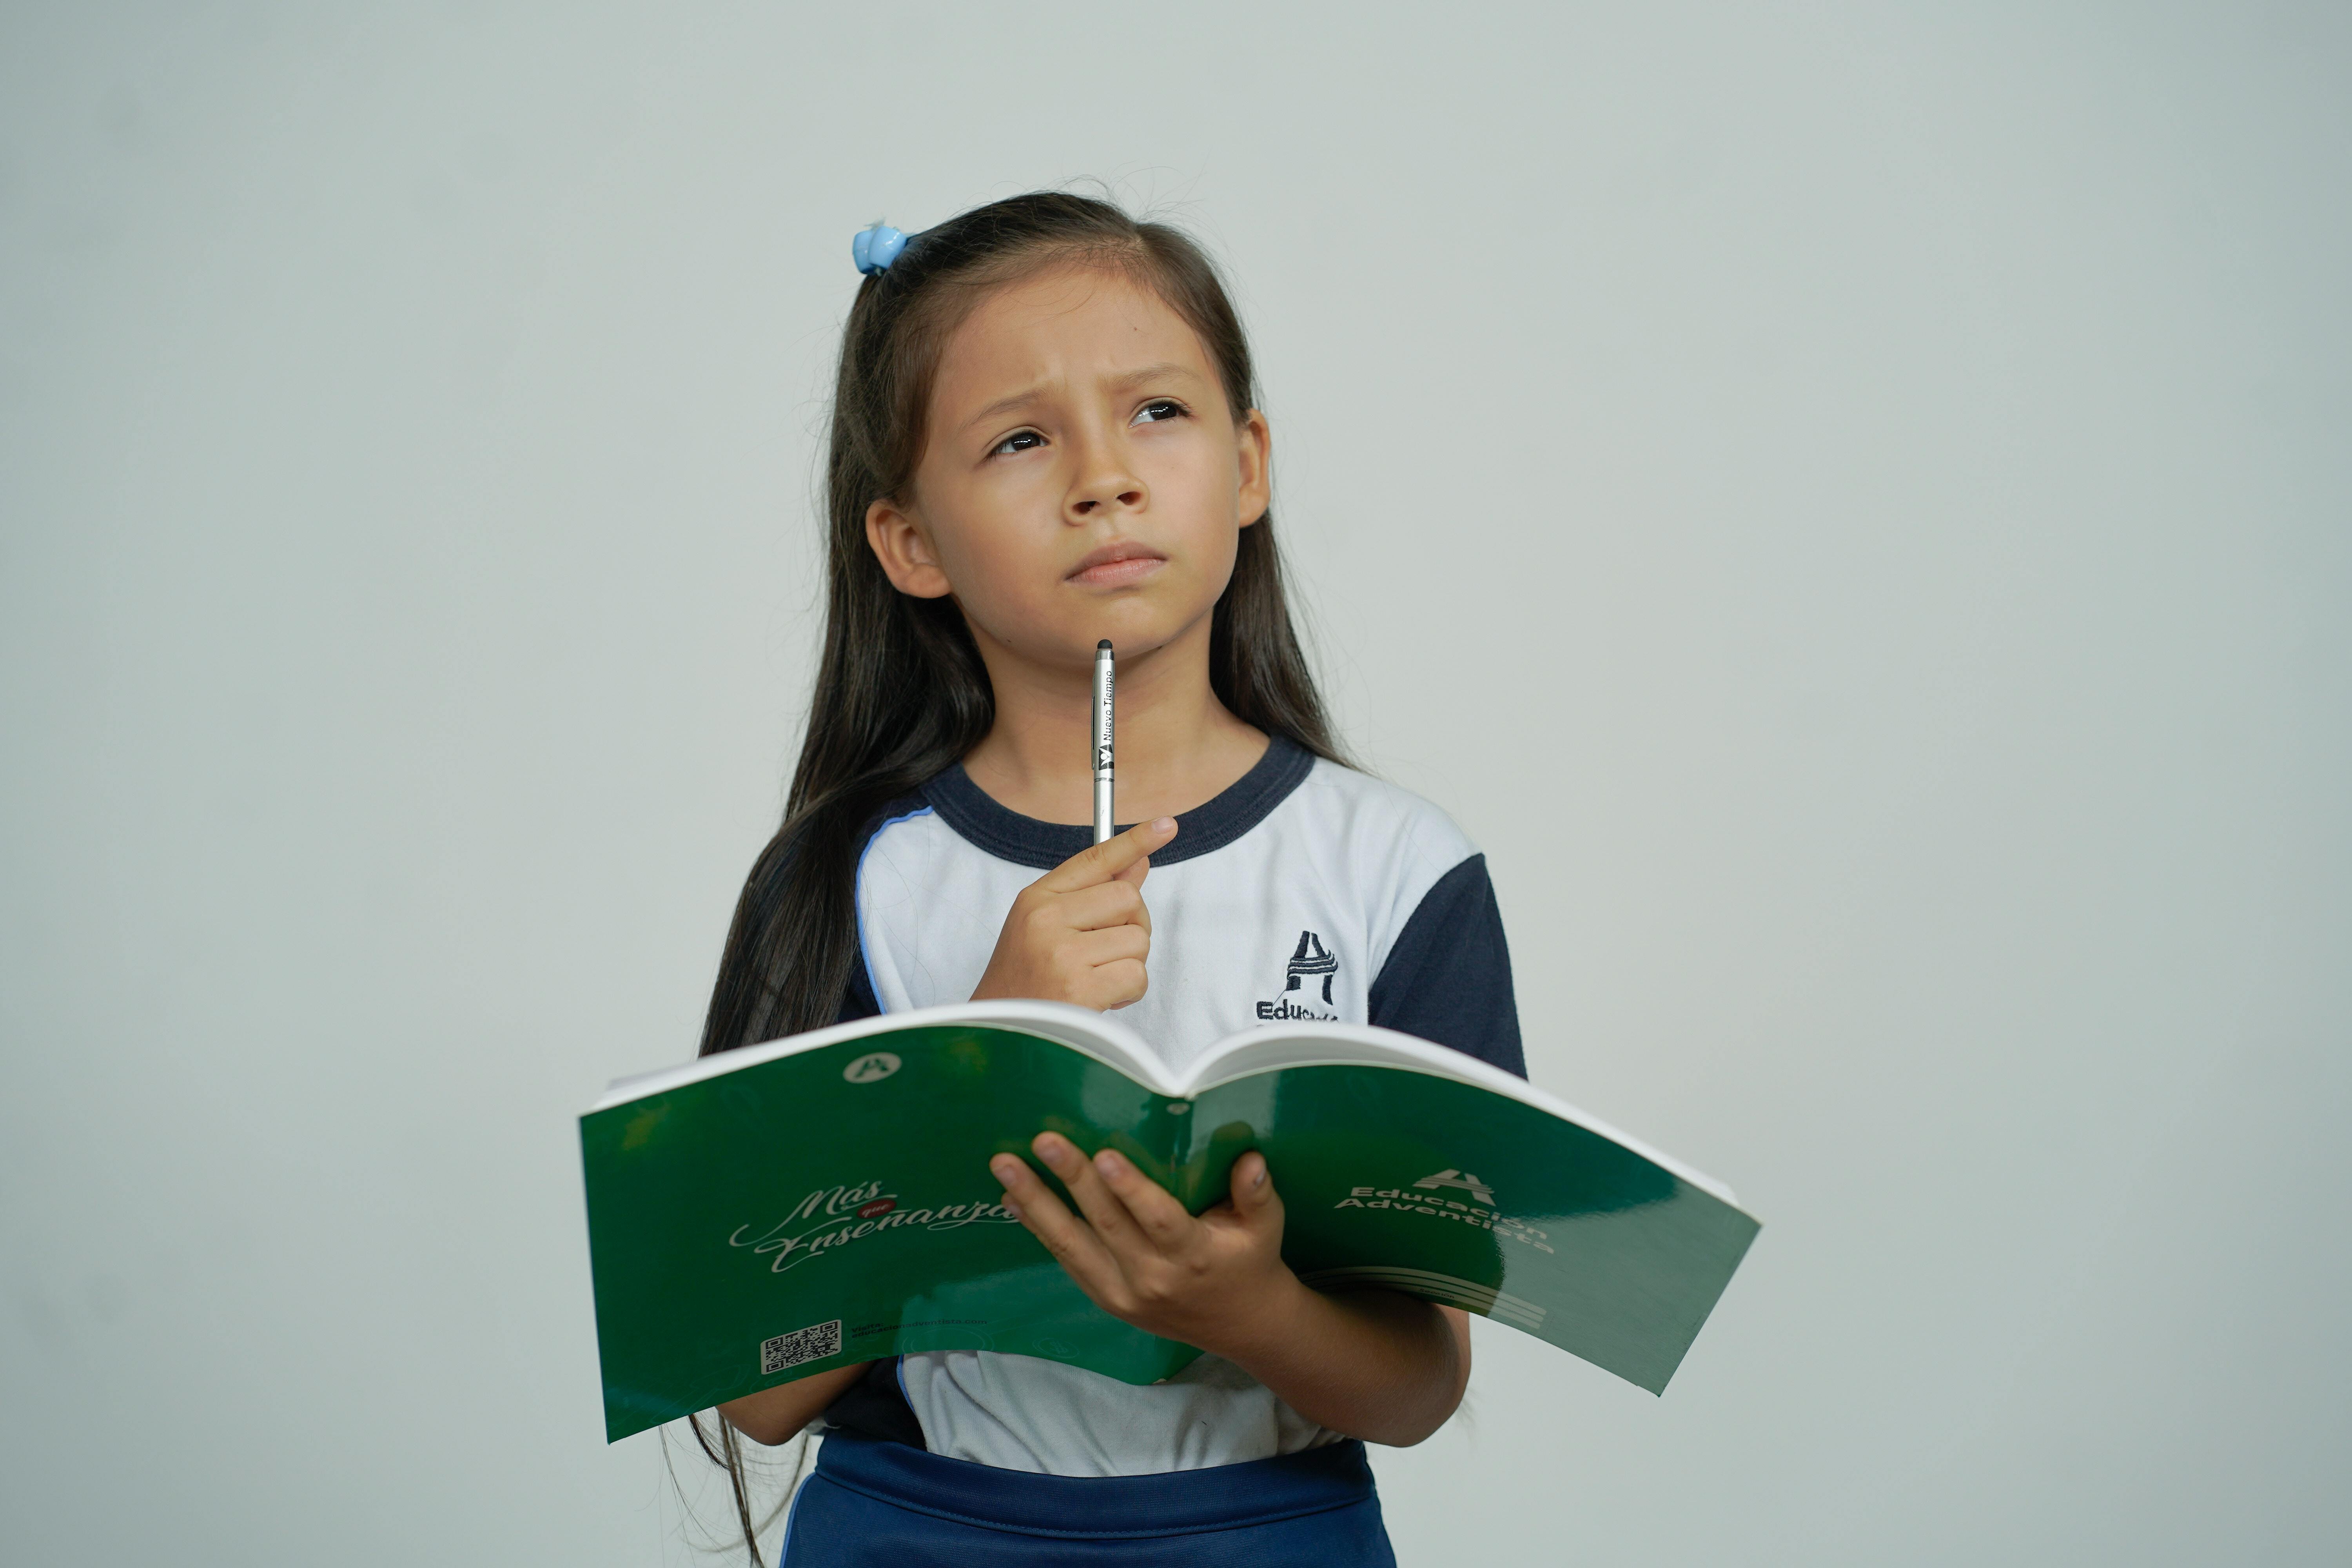 A female child holding a book while thinking